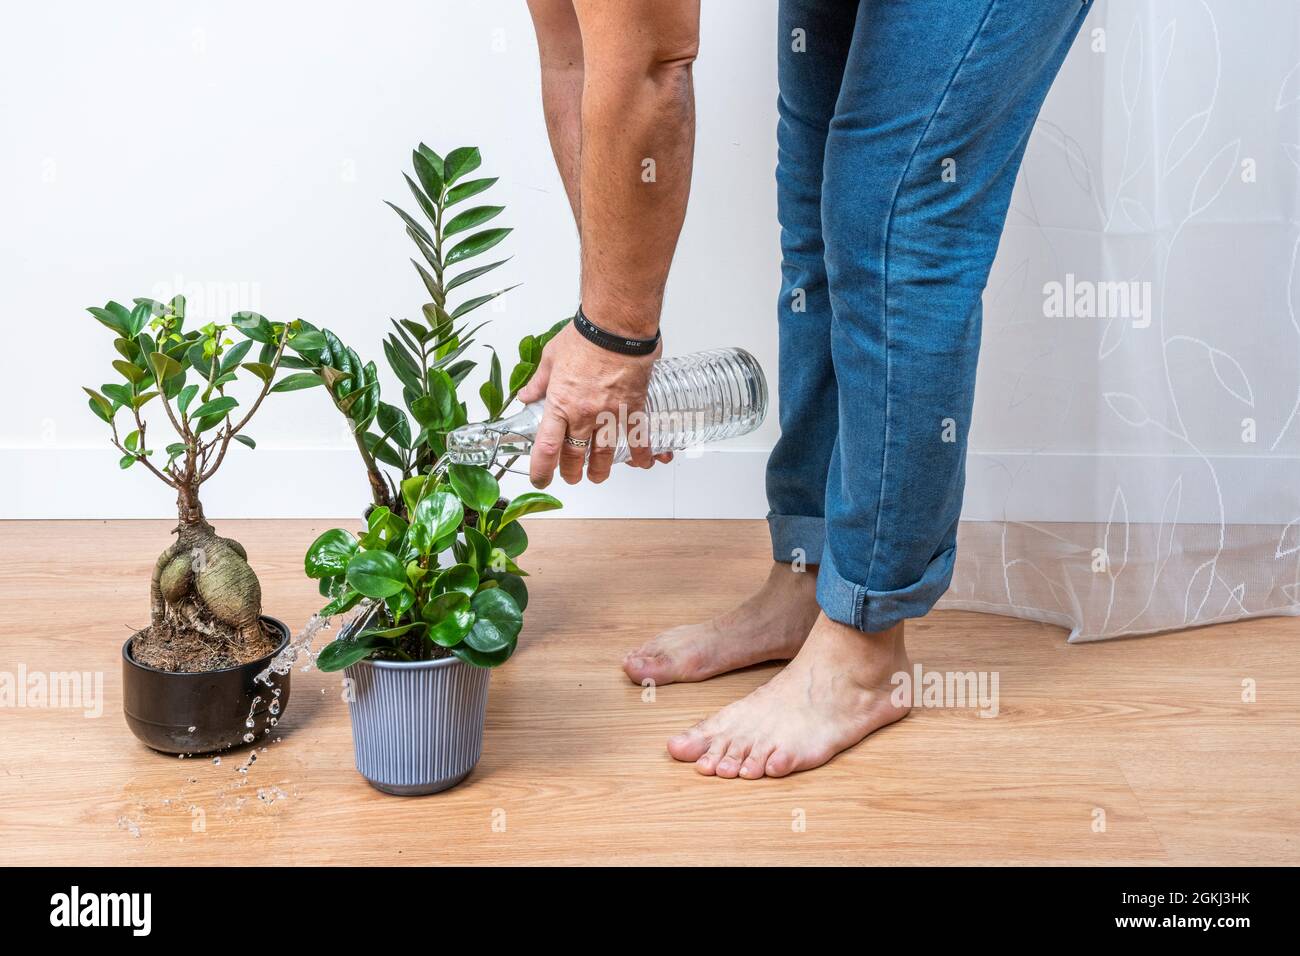 Man watering plants roughly with a glass bottle and wetting everything. Zamioculca, ginseng ficus Stock Photo